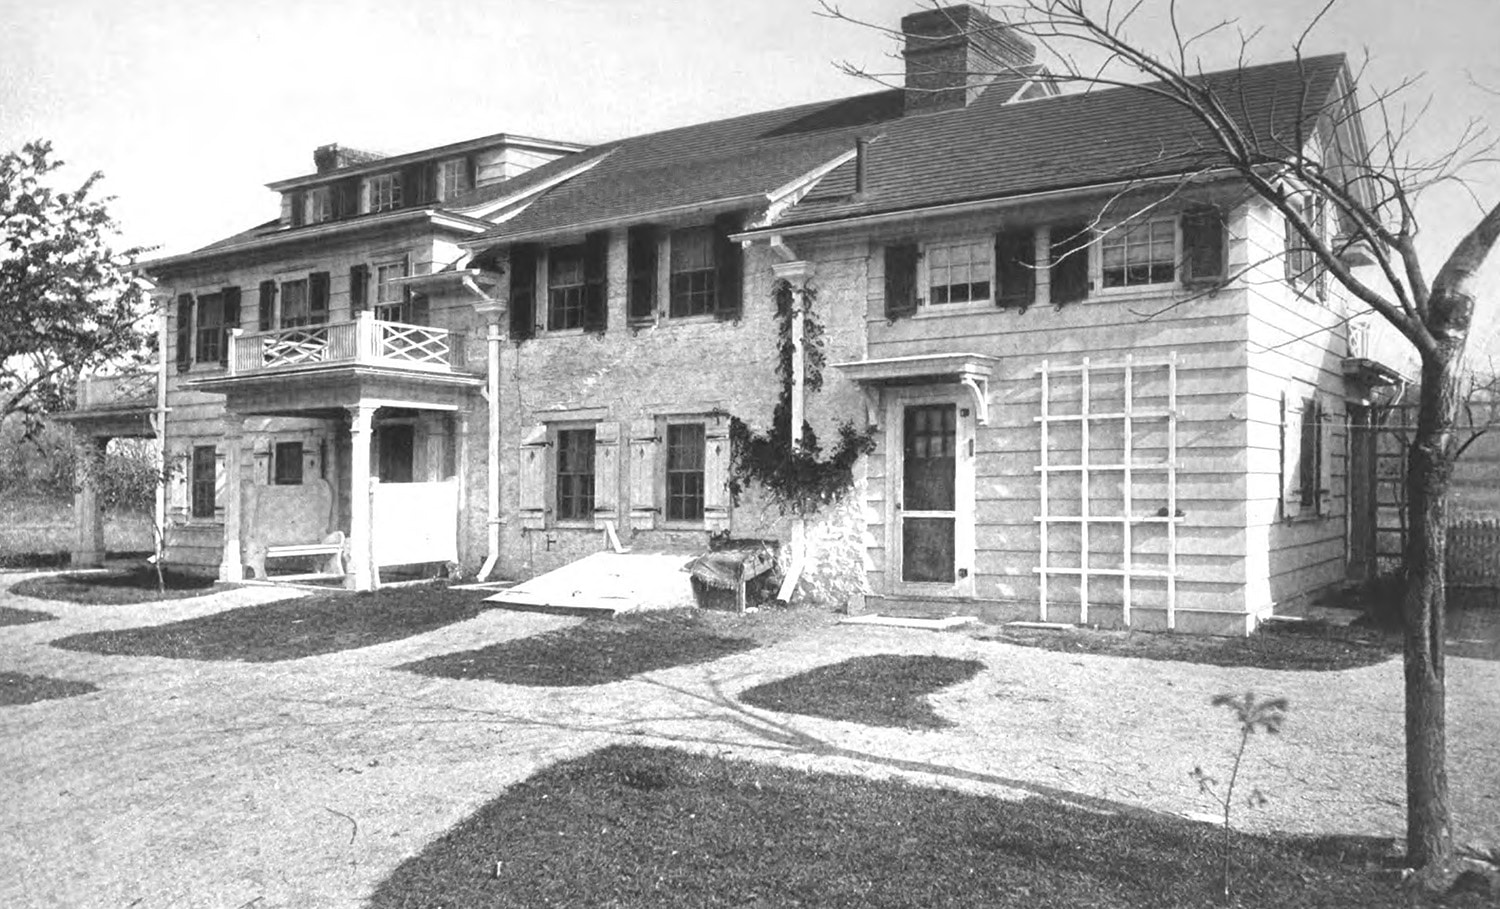 black and white image showing the stone house with wings on either side